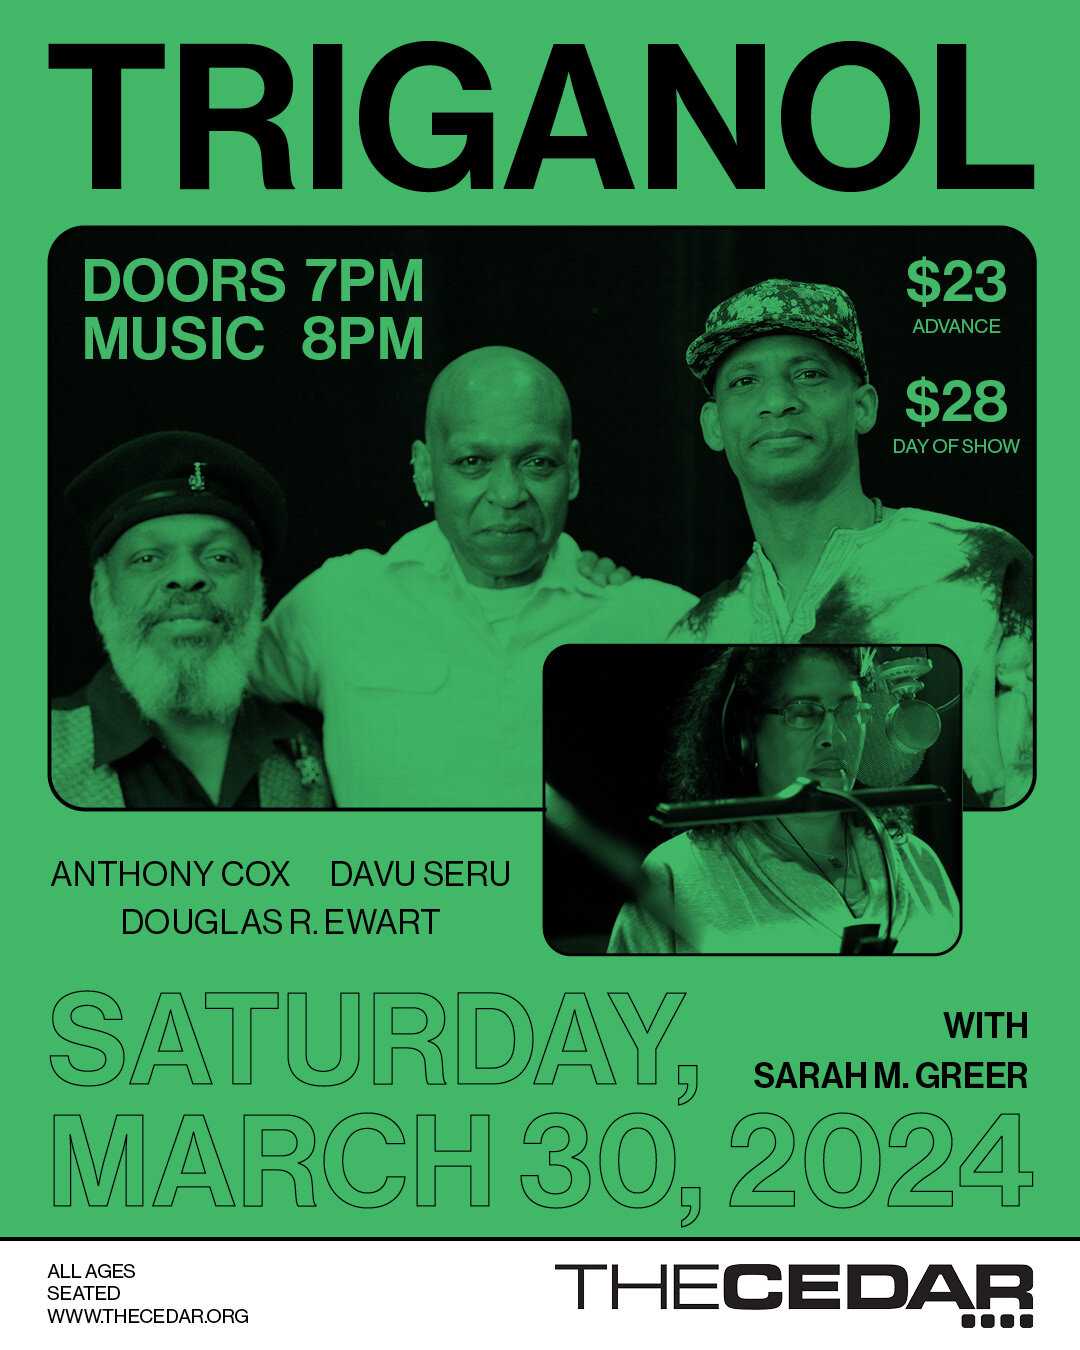 ❗This Saturday, March 30, 2024❗
A rare performance by Triganol featuring the formidable talents of Anthony Cox (Bass, Cello, and Percussion), Davu Seru (Drums and Percussion), and Douglas R. Ewart (Winds, Percussion, Poetry and Invented Instruments) 